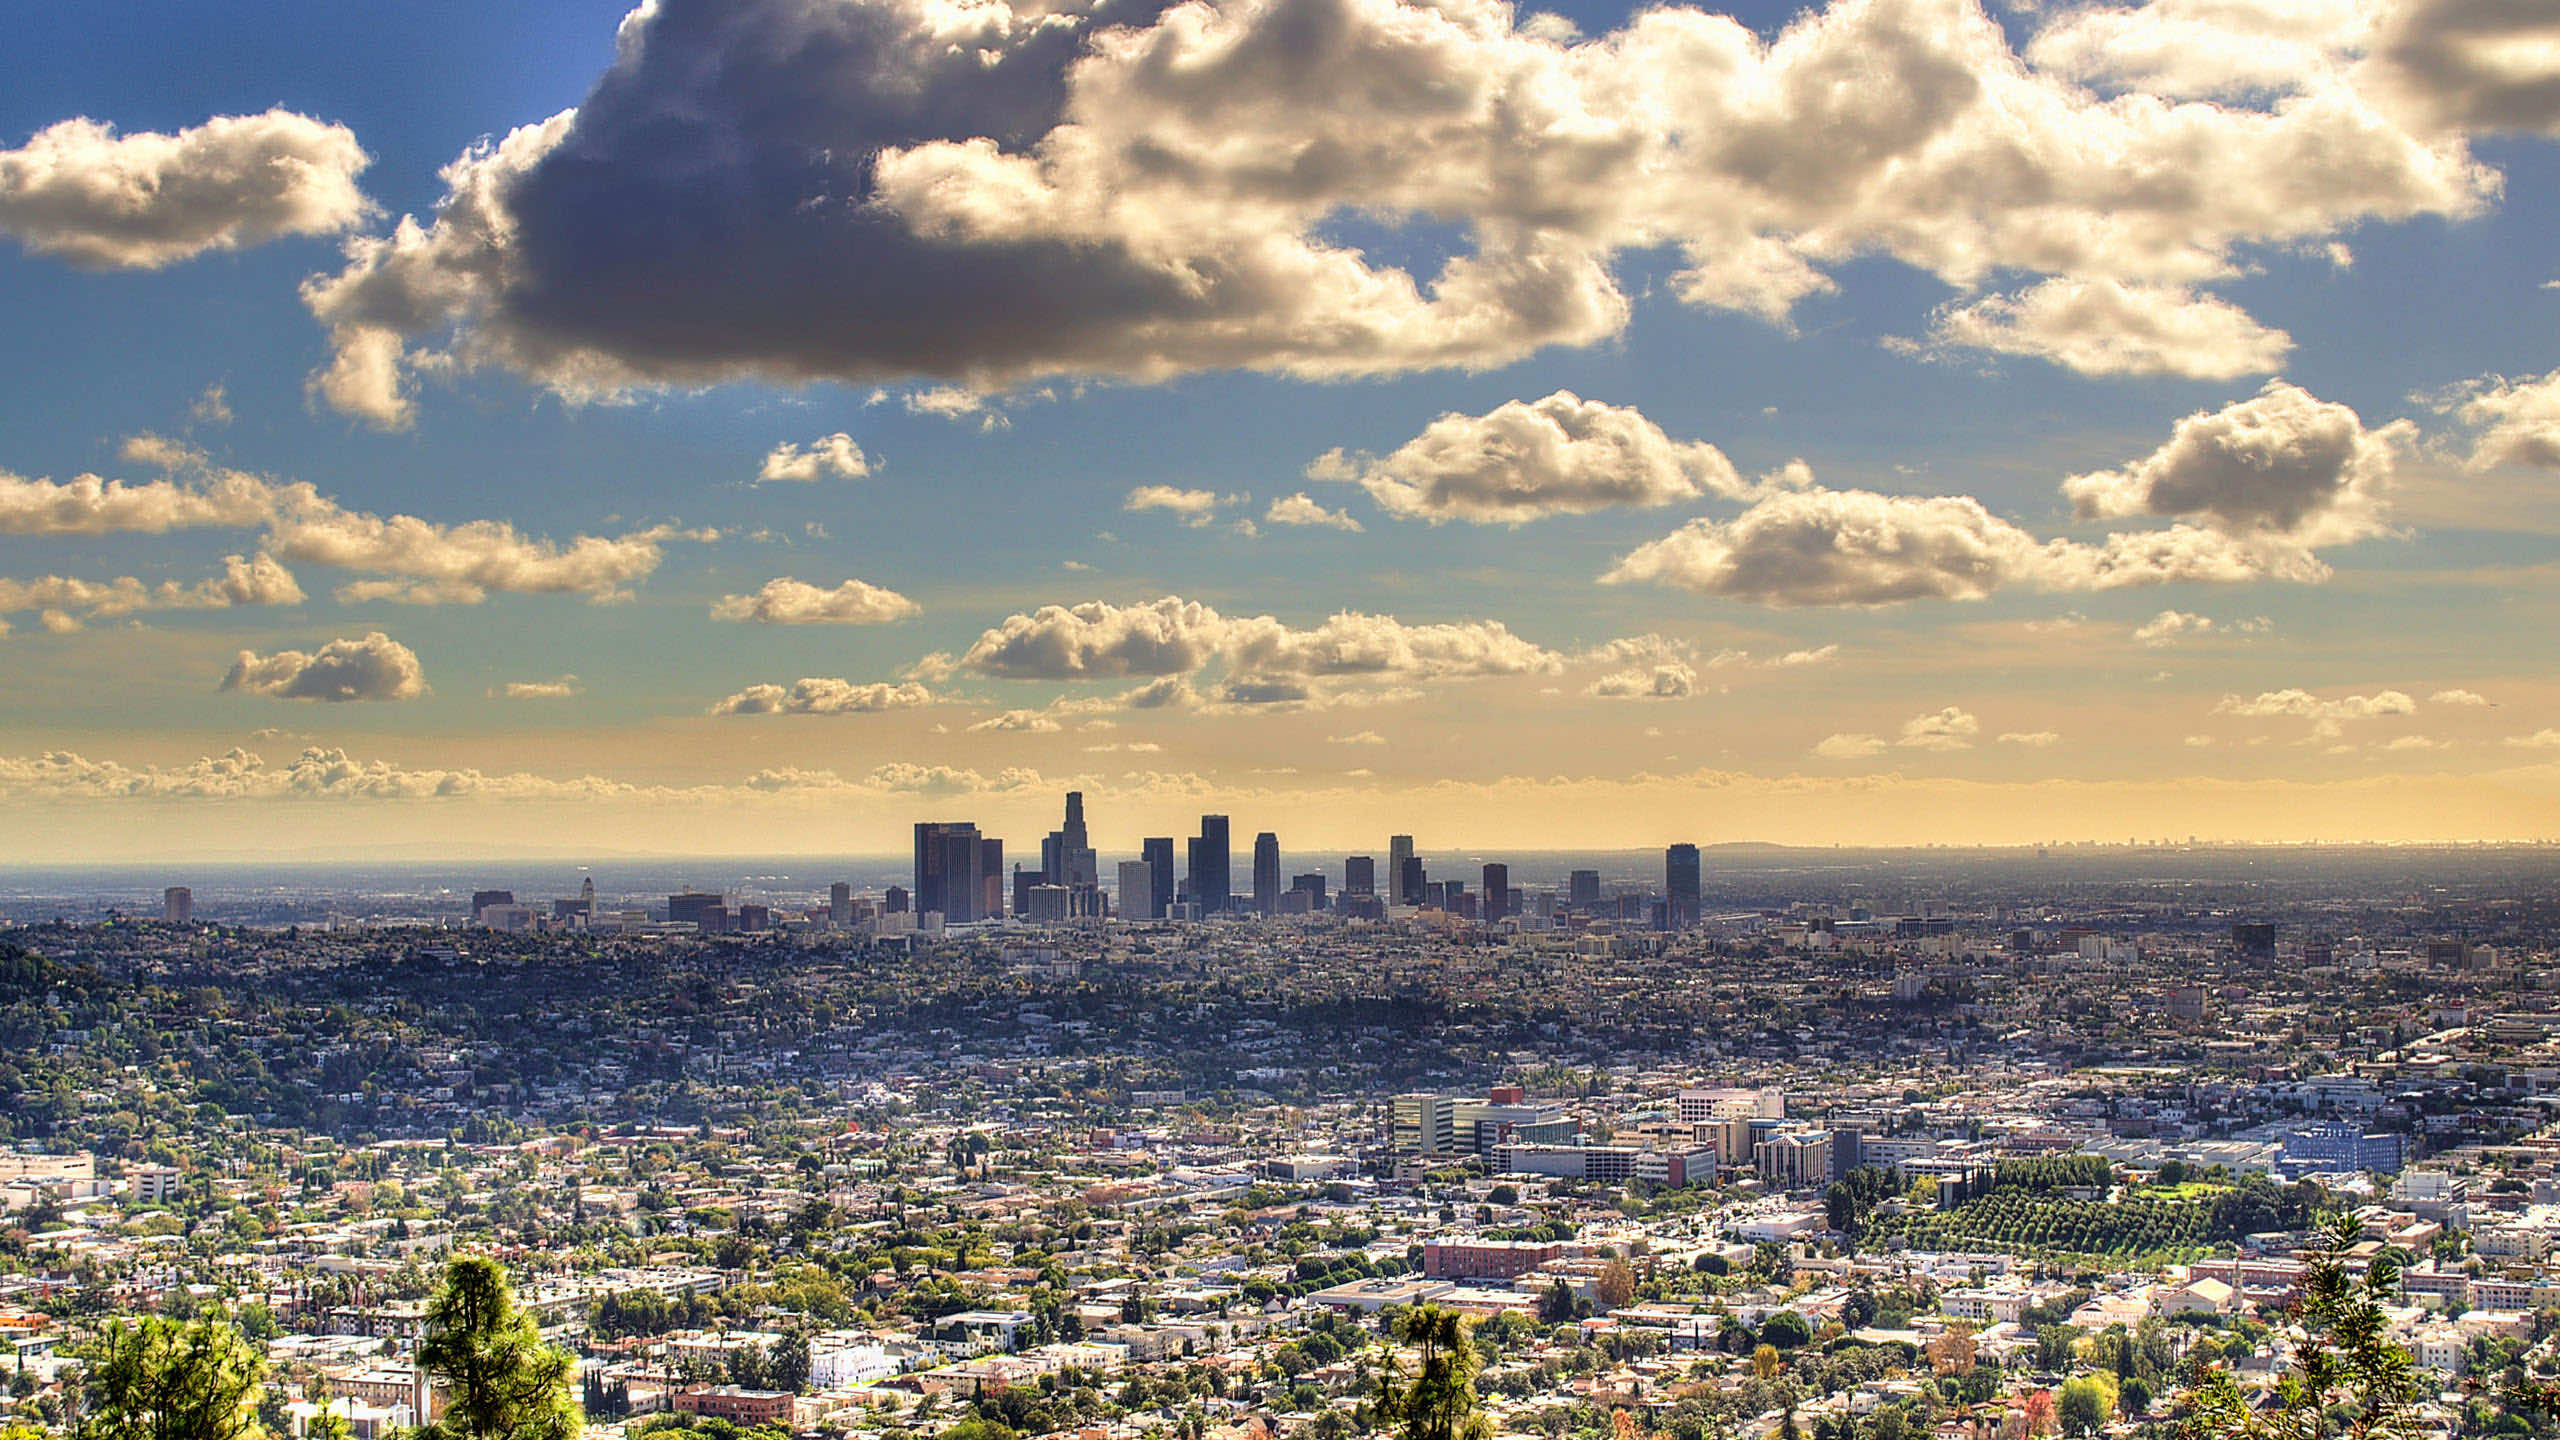 42 High Definition Los Angeles Wallpaper Images In 3D For Download.